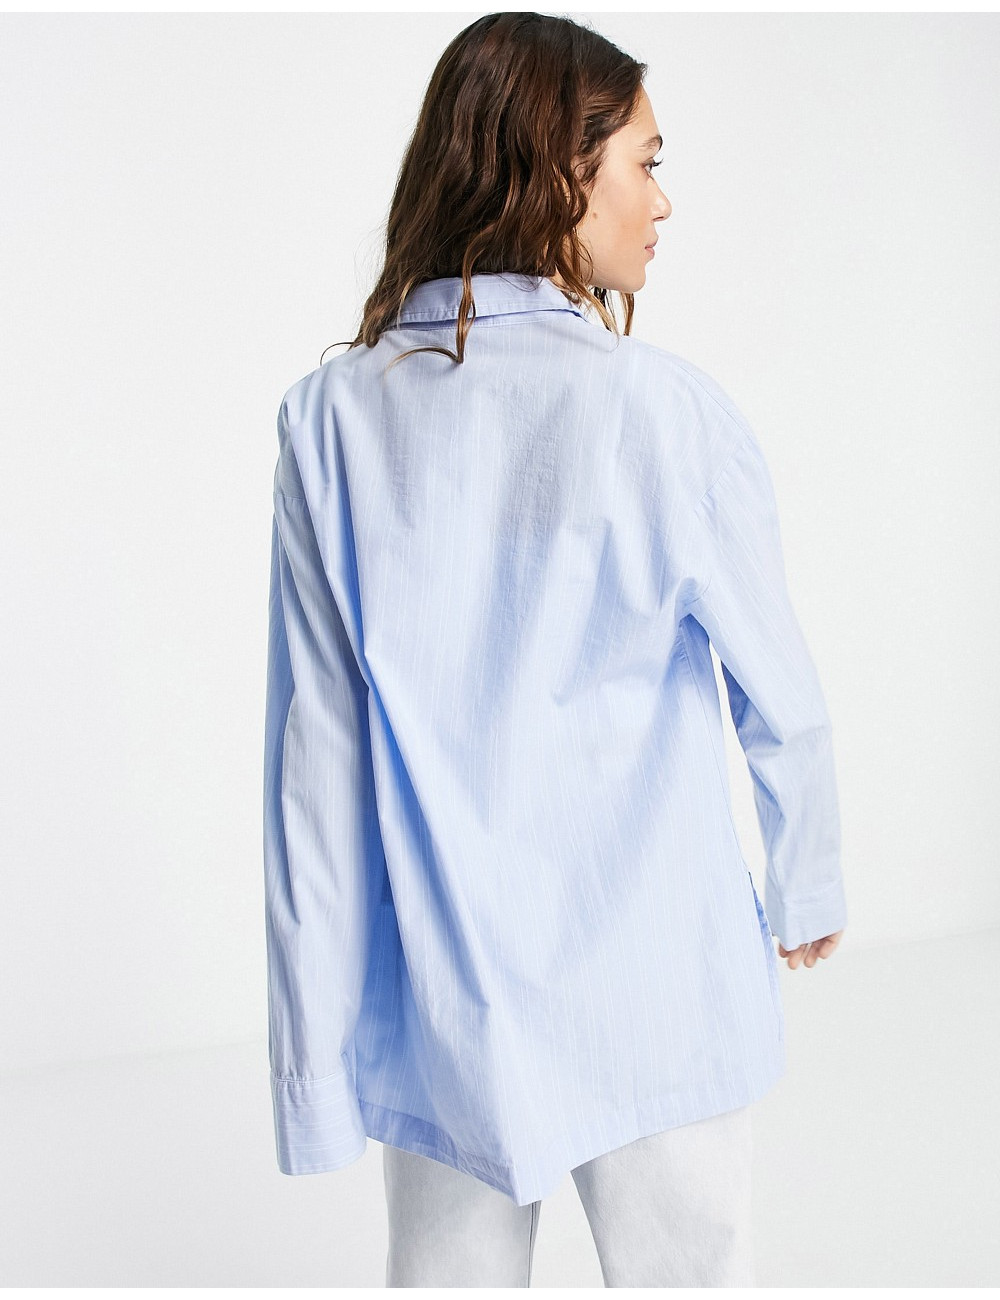 Topshop woven shirt in pale...